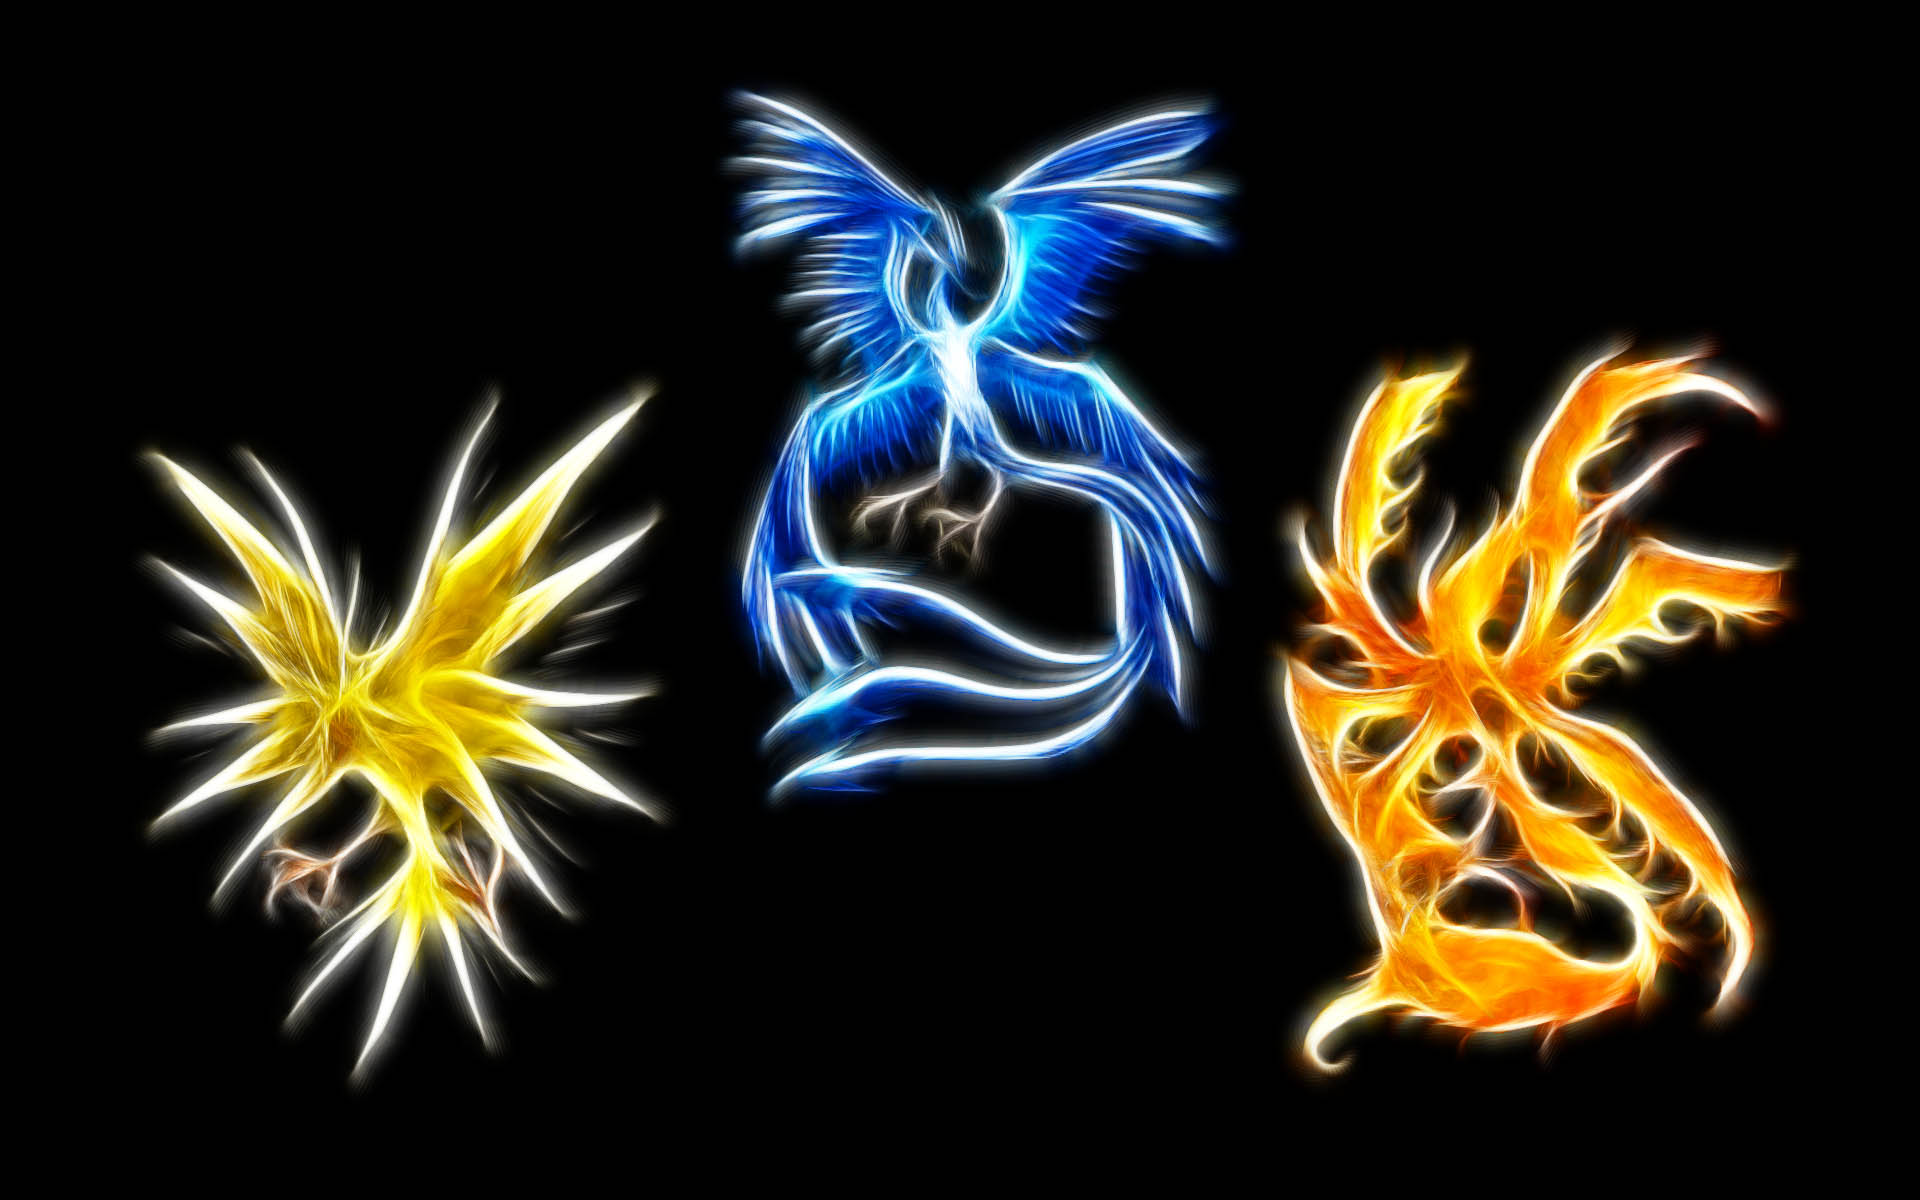 Legendary Pokémon Articuno, Moltres, and Zapdos soar with majestic wings and glowing tails.